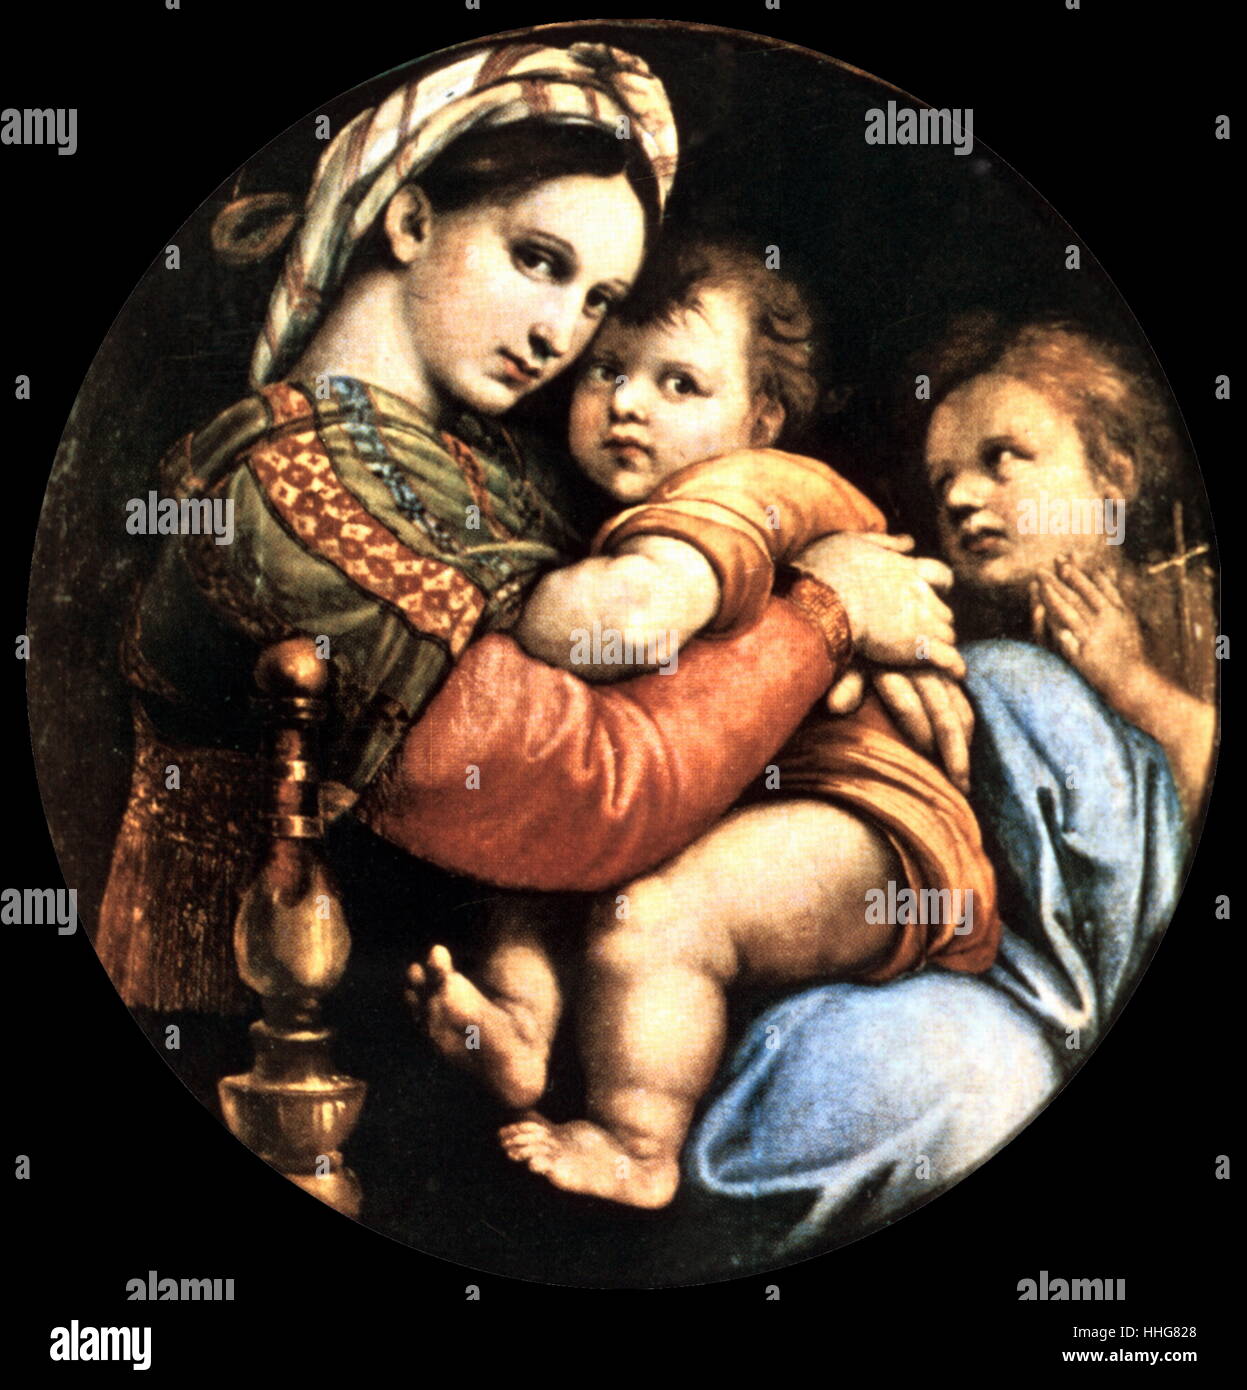 Madonna della seggiola or Madonna della sedia, by Raffaello Sanzio da Urbino (1483-1520). Oil painting on panel, finished in 1513–1514. Raphael was an Italian painter and architect of the High Renaissance. The Madonna della seggiola, in the Palazzo Pitti, in Florence, depicts Mary embracing the child Christ, while the young John the Baptist devoutly watches. Stock Photo